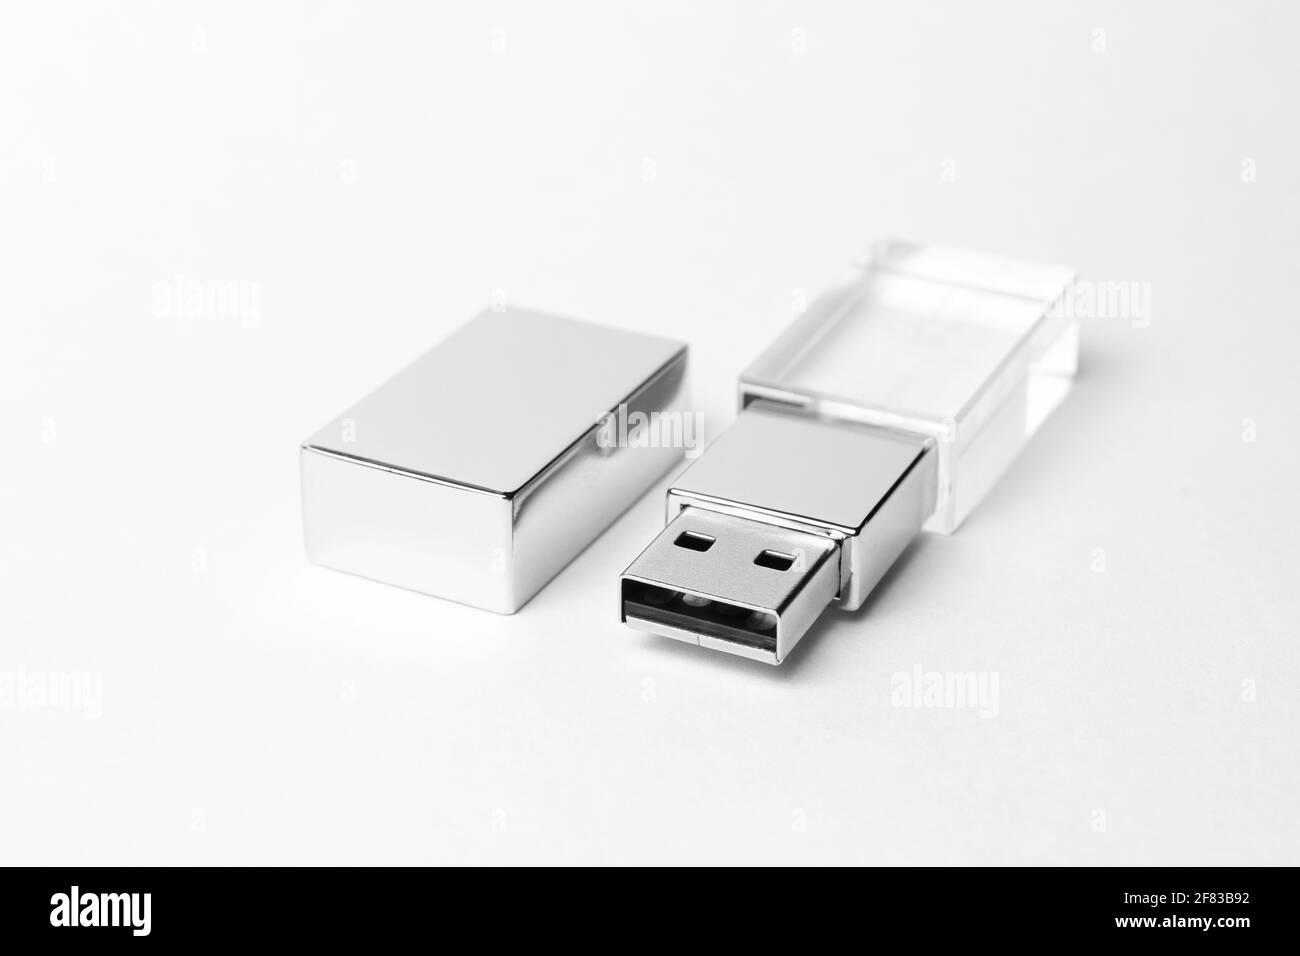 Glass USB stick with a metal cap on grey background. Close-up photo. Copy space. A high resolution. Stock Photo